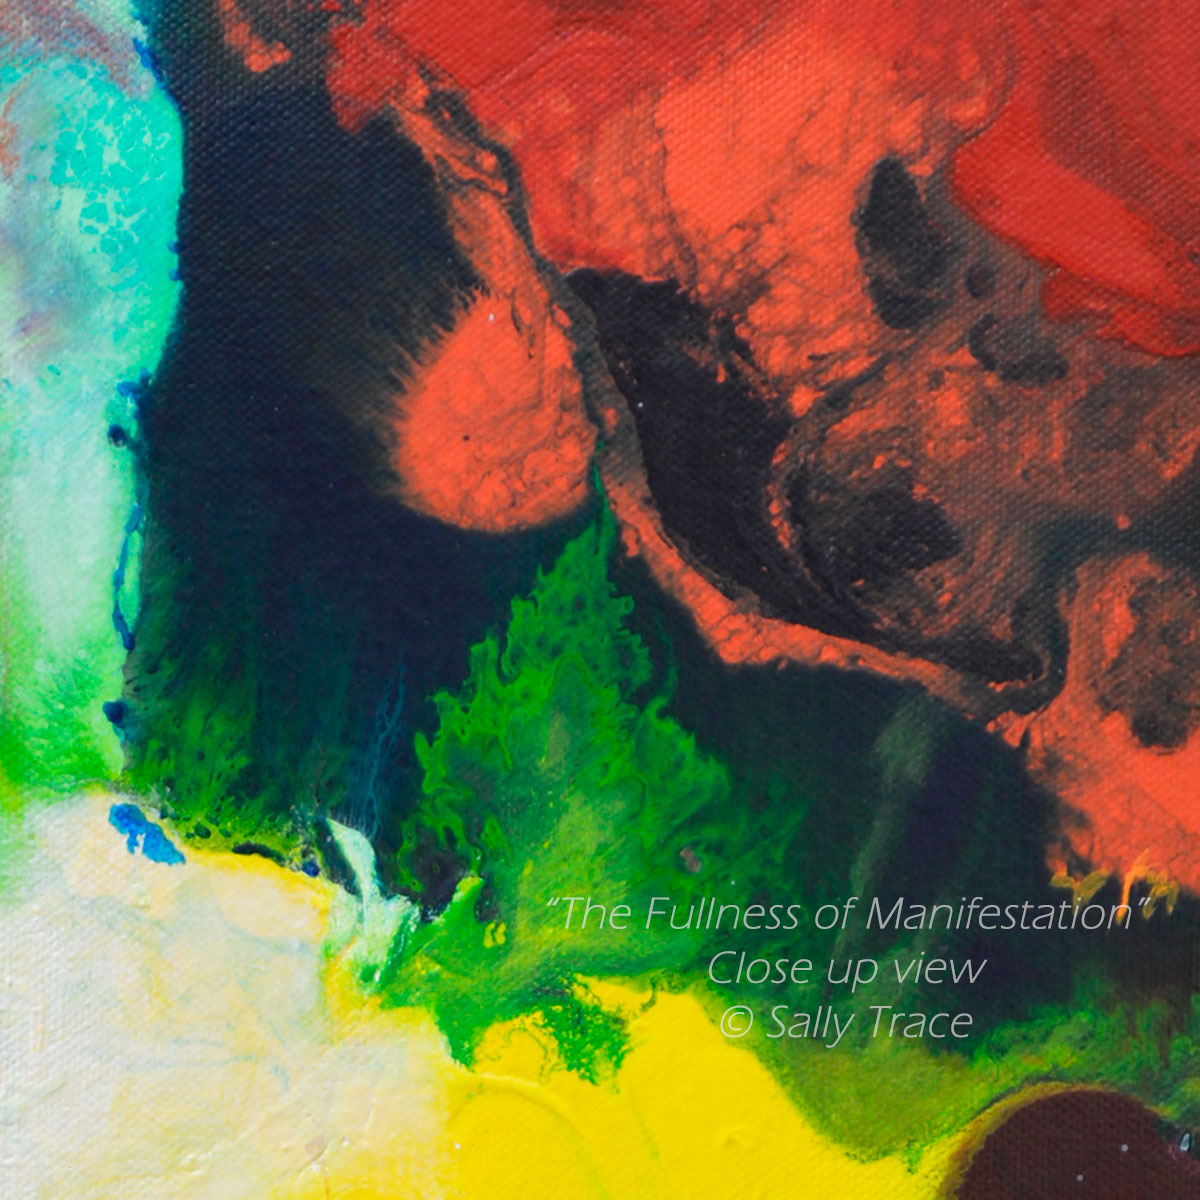 "The Fullness of Manifestations" fine art prints of an original abstract fluid painting by Sally Trace, a contemporary artwork for the home of office, decotr for your living room, dining room, colorful abstract art paintings, abstract art for sale by the artist, close up detail